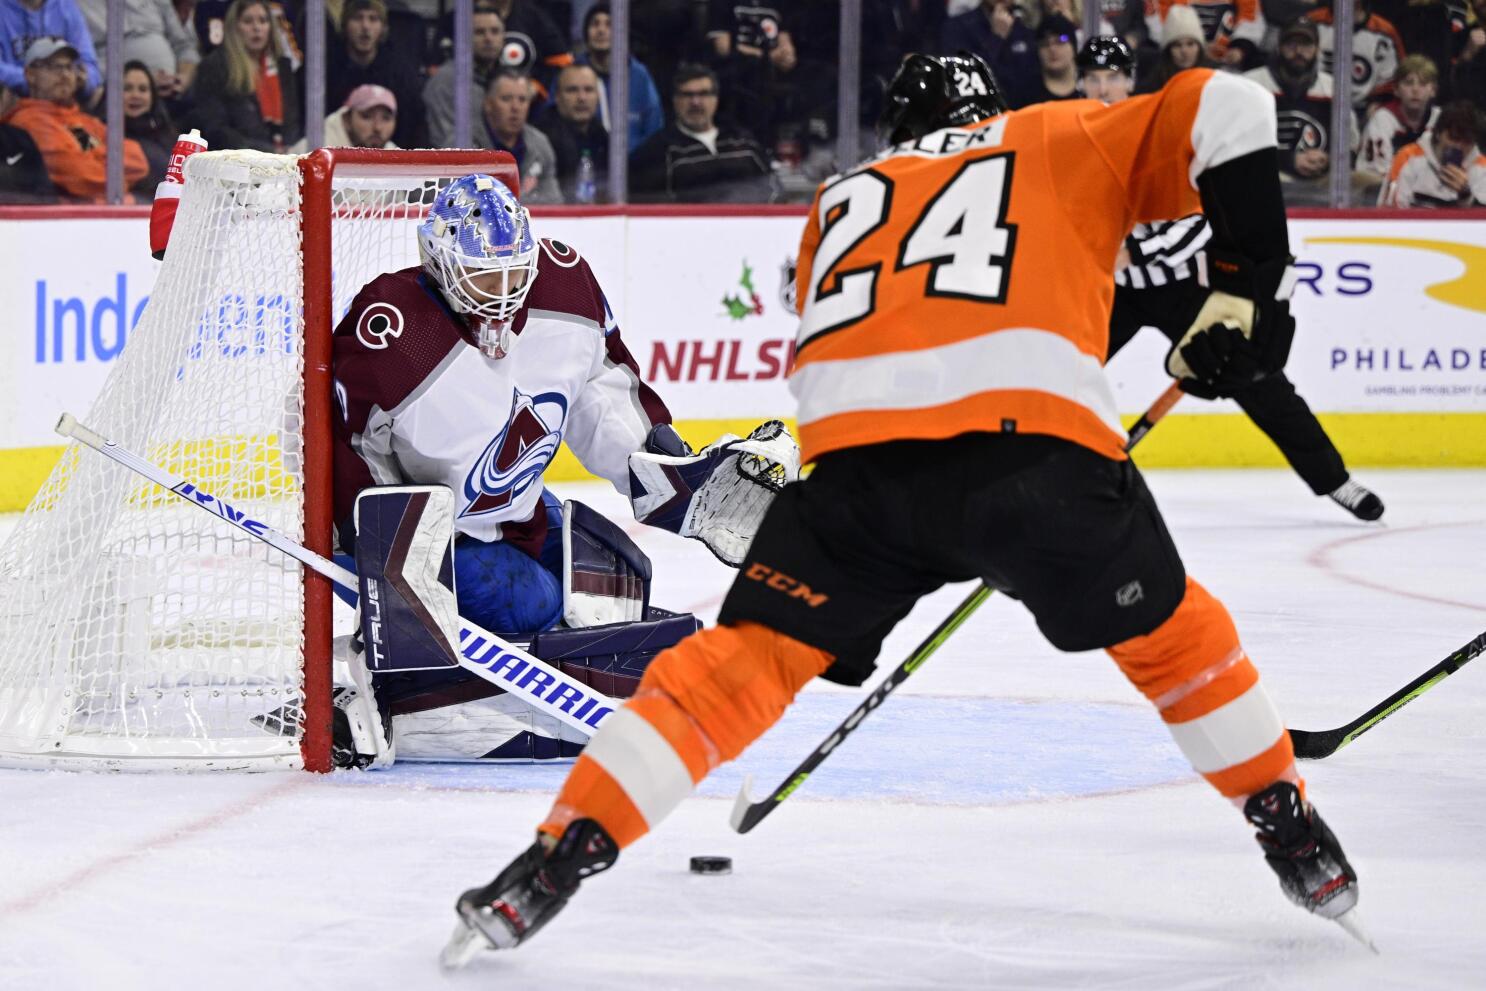 Flyers defeat the injury-plagued Colorado Avalanche, 5-3